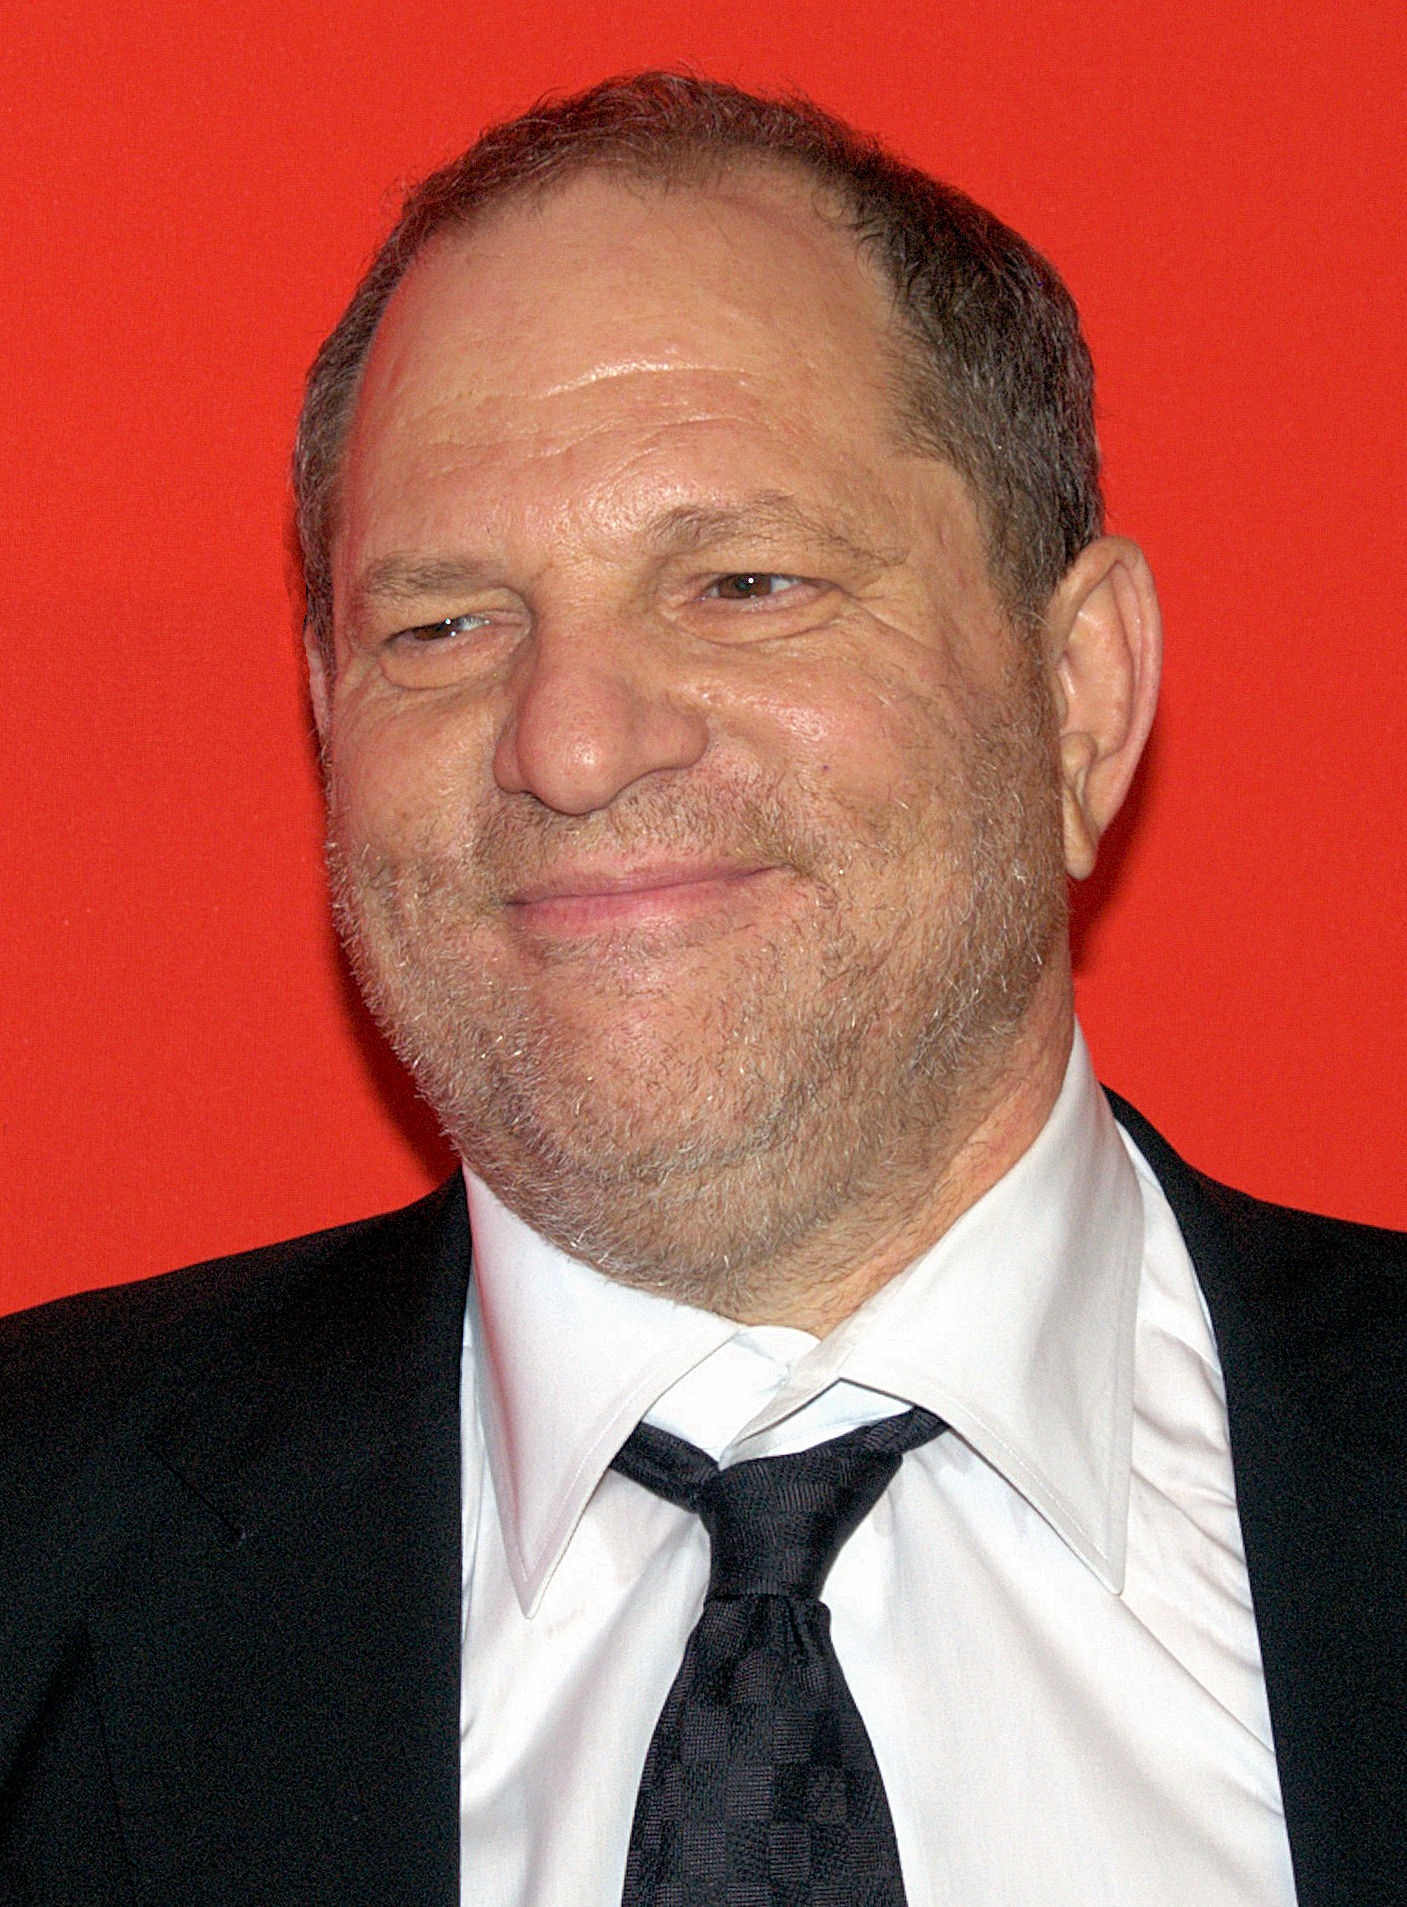 Hollywood producer Harvey Weinstein has been accused of sexual harassment and rape